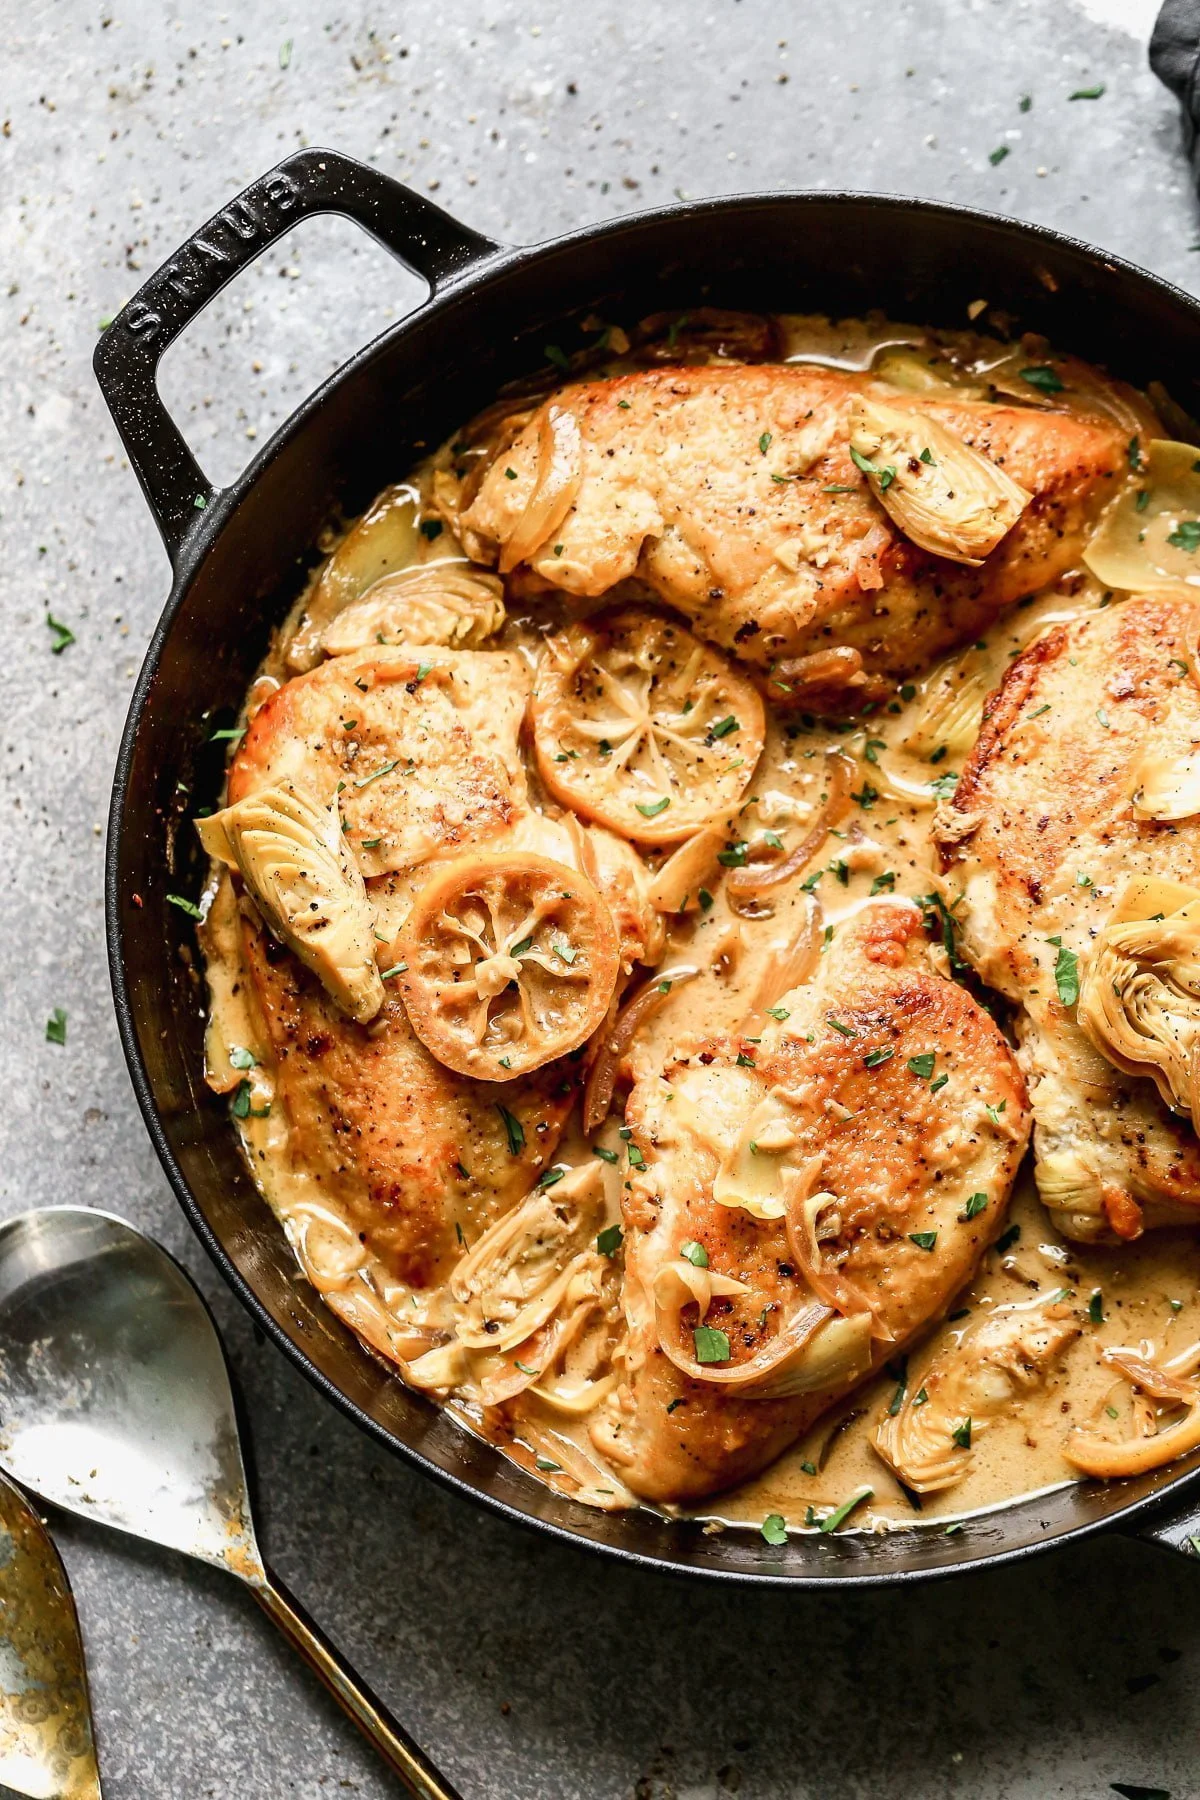 Swimming in a luscious lemon-infused wine sauce and studded with briny artichokes and sweet caramelized onions, our Chicken with Artichokes is the perfect bright springy dish to whip up when we also need a little cozy for those curve ball cold days we all get this time of year. 